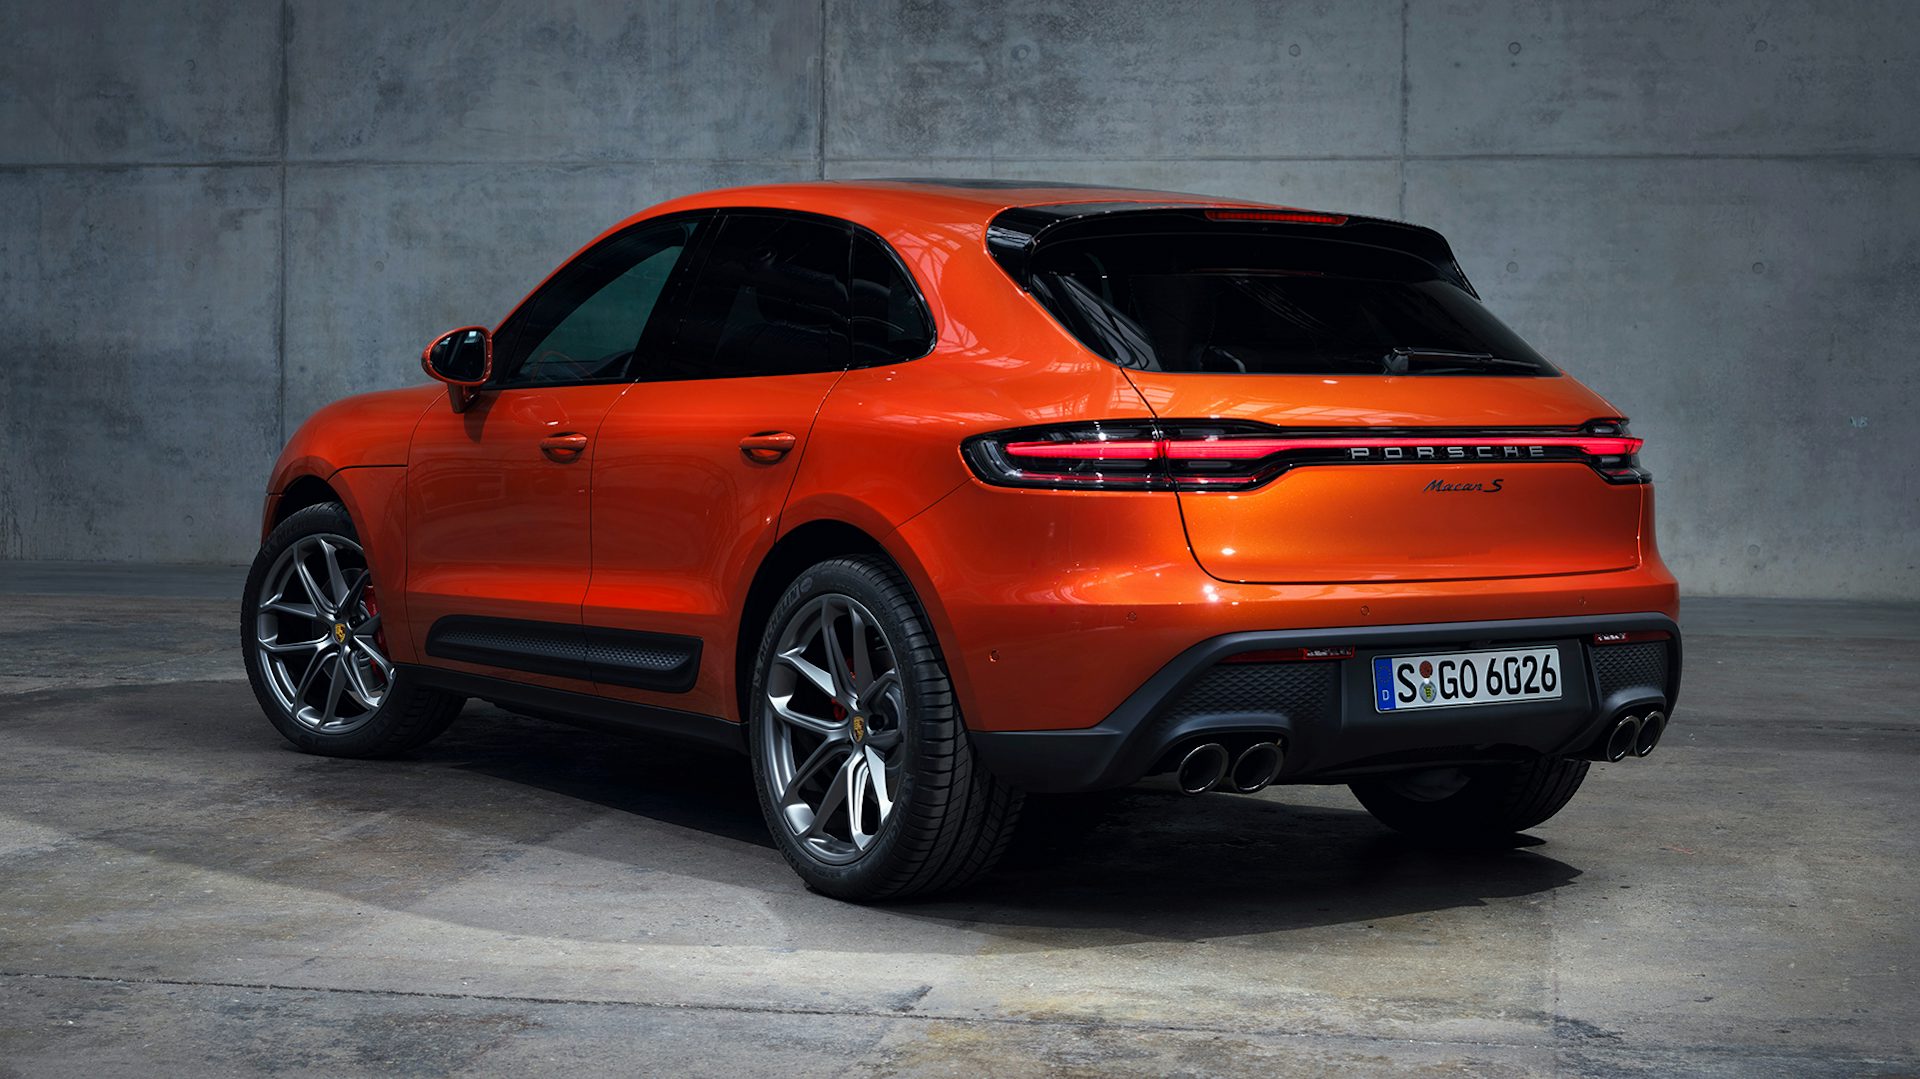 2022 Porsche Macan facelift revealed price, specs and release date